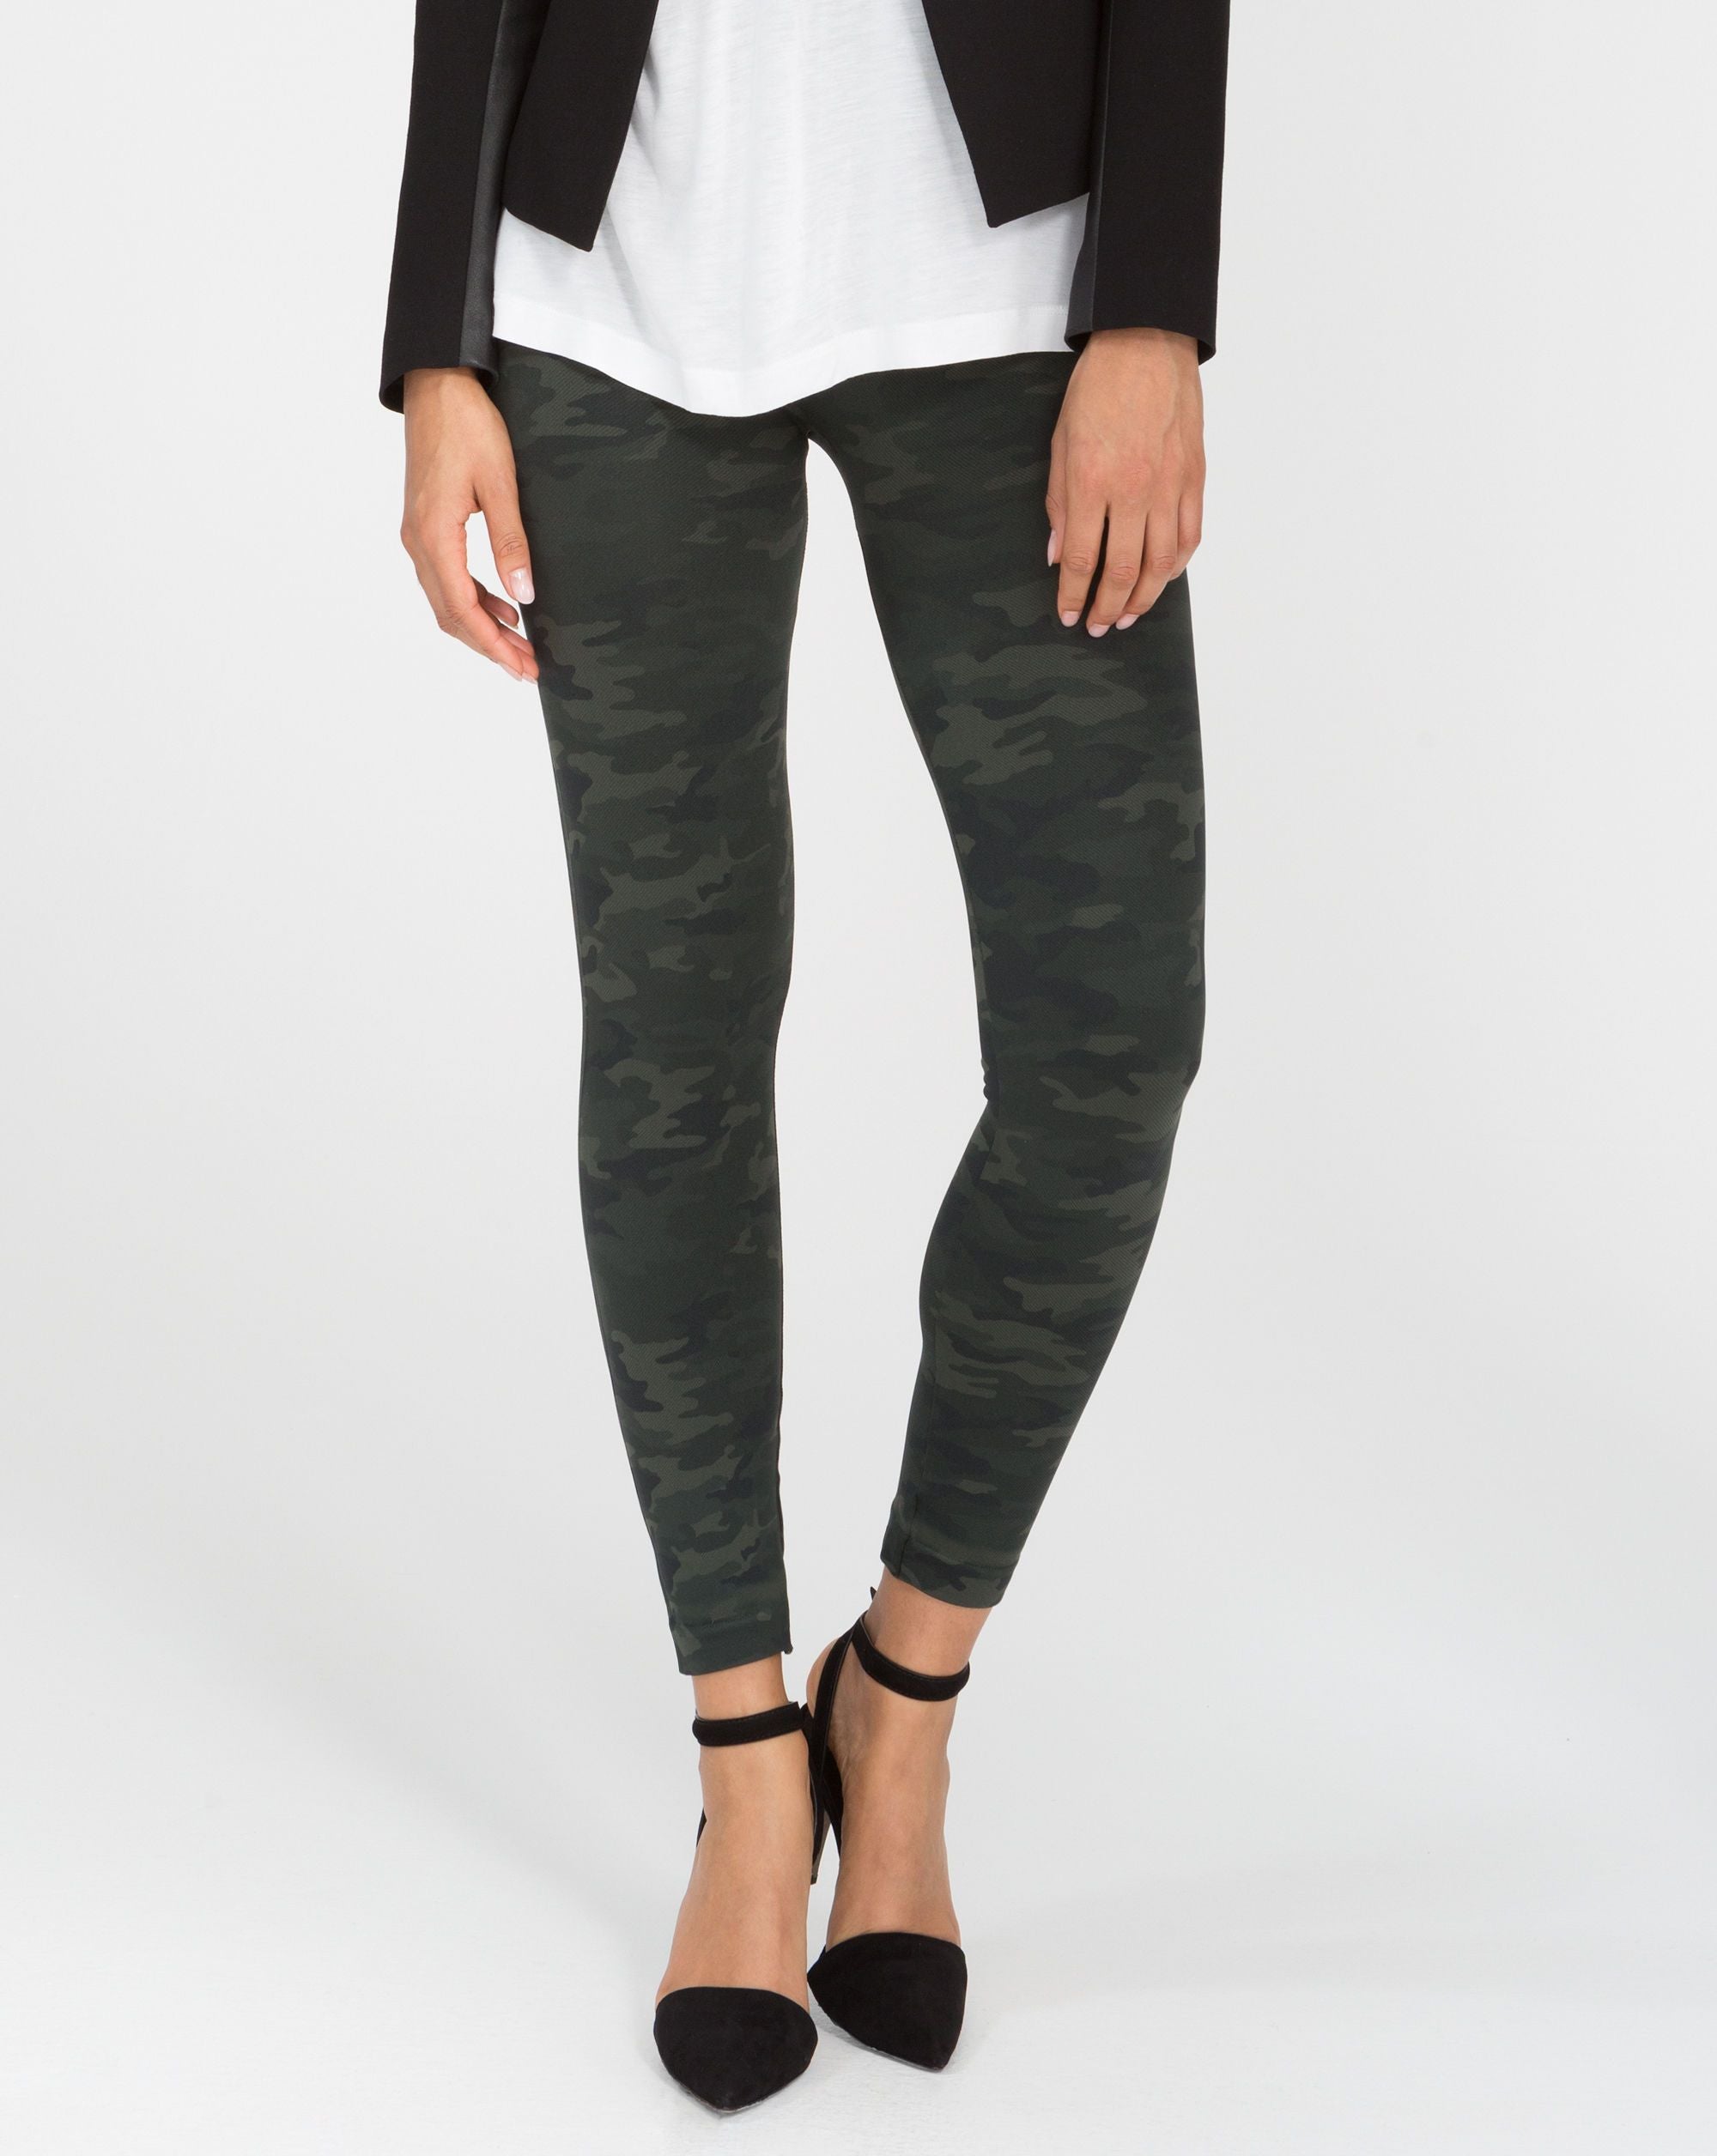 SPANX Look At Me Now Seamless Leggings {Camo Green}